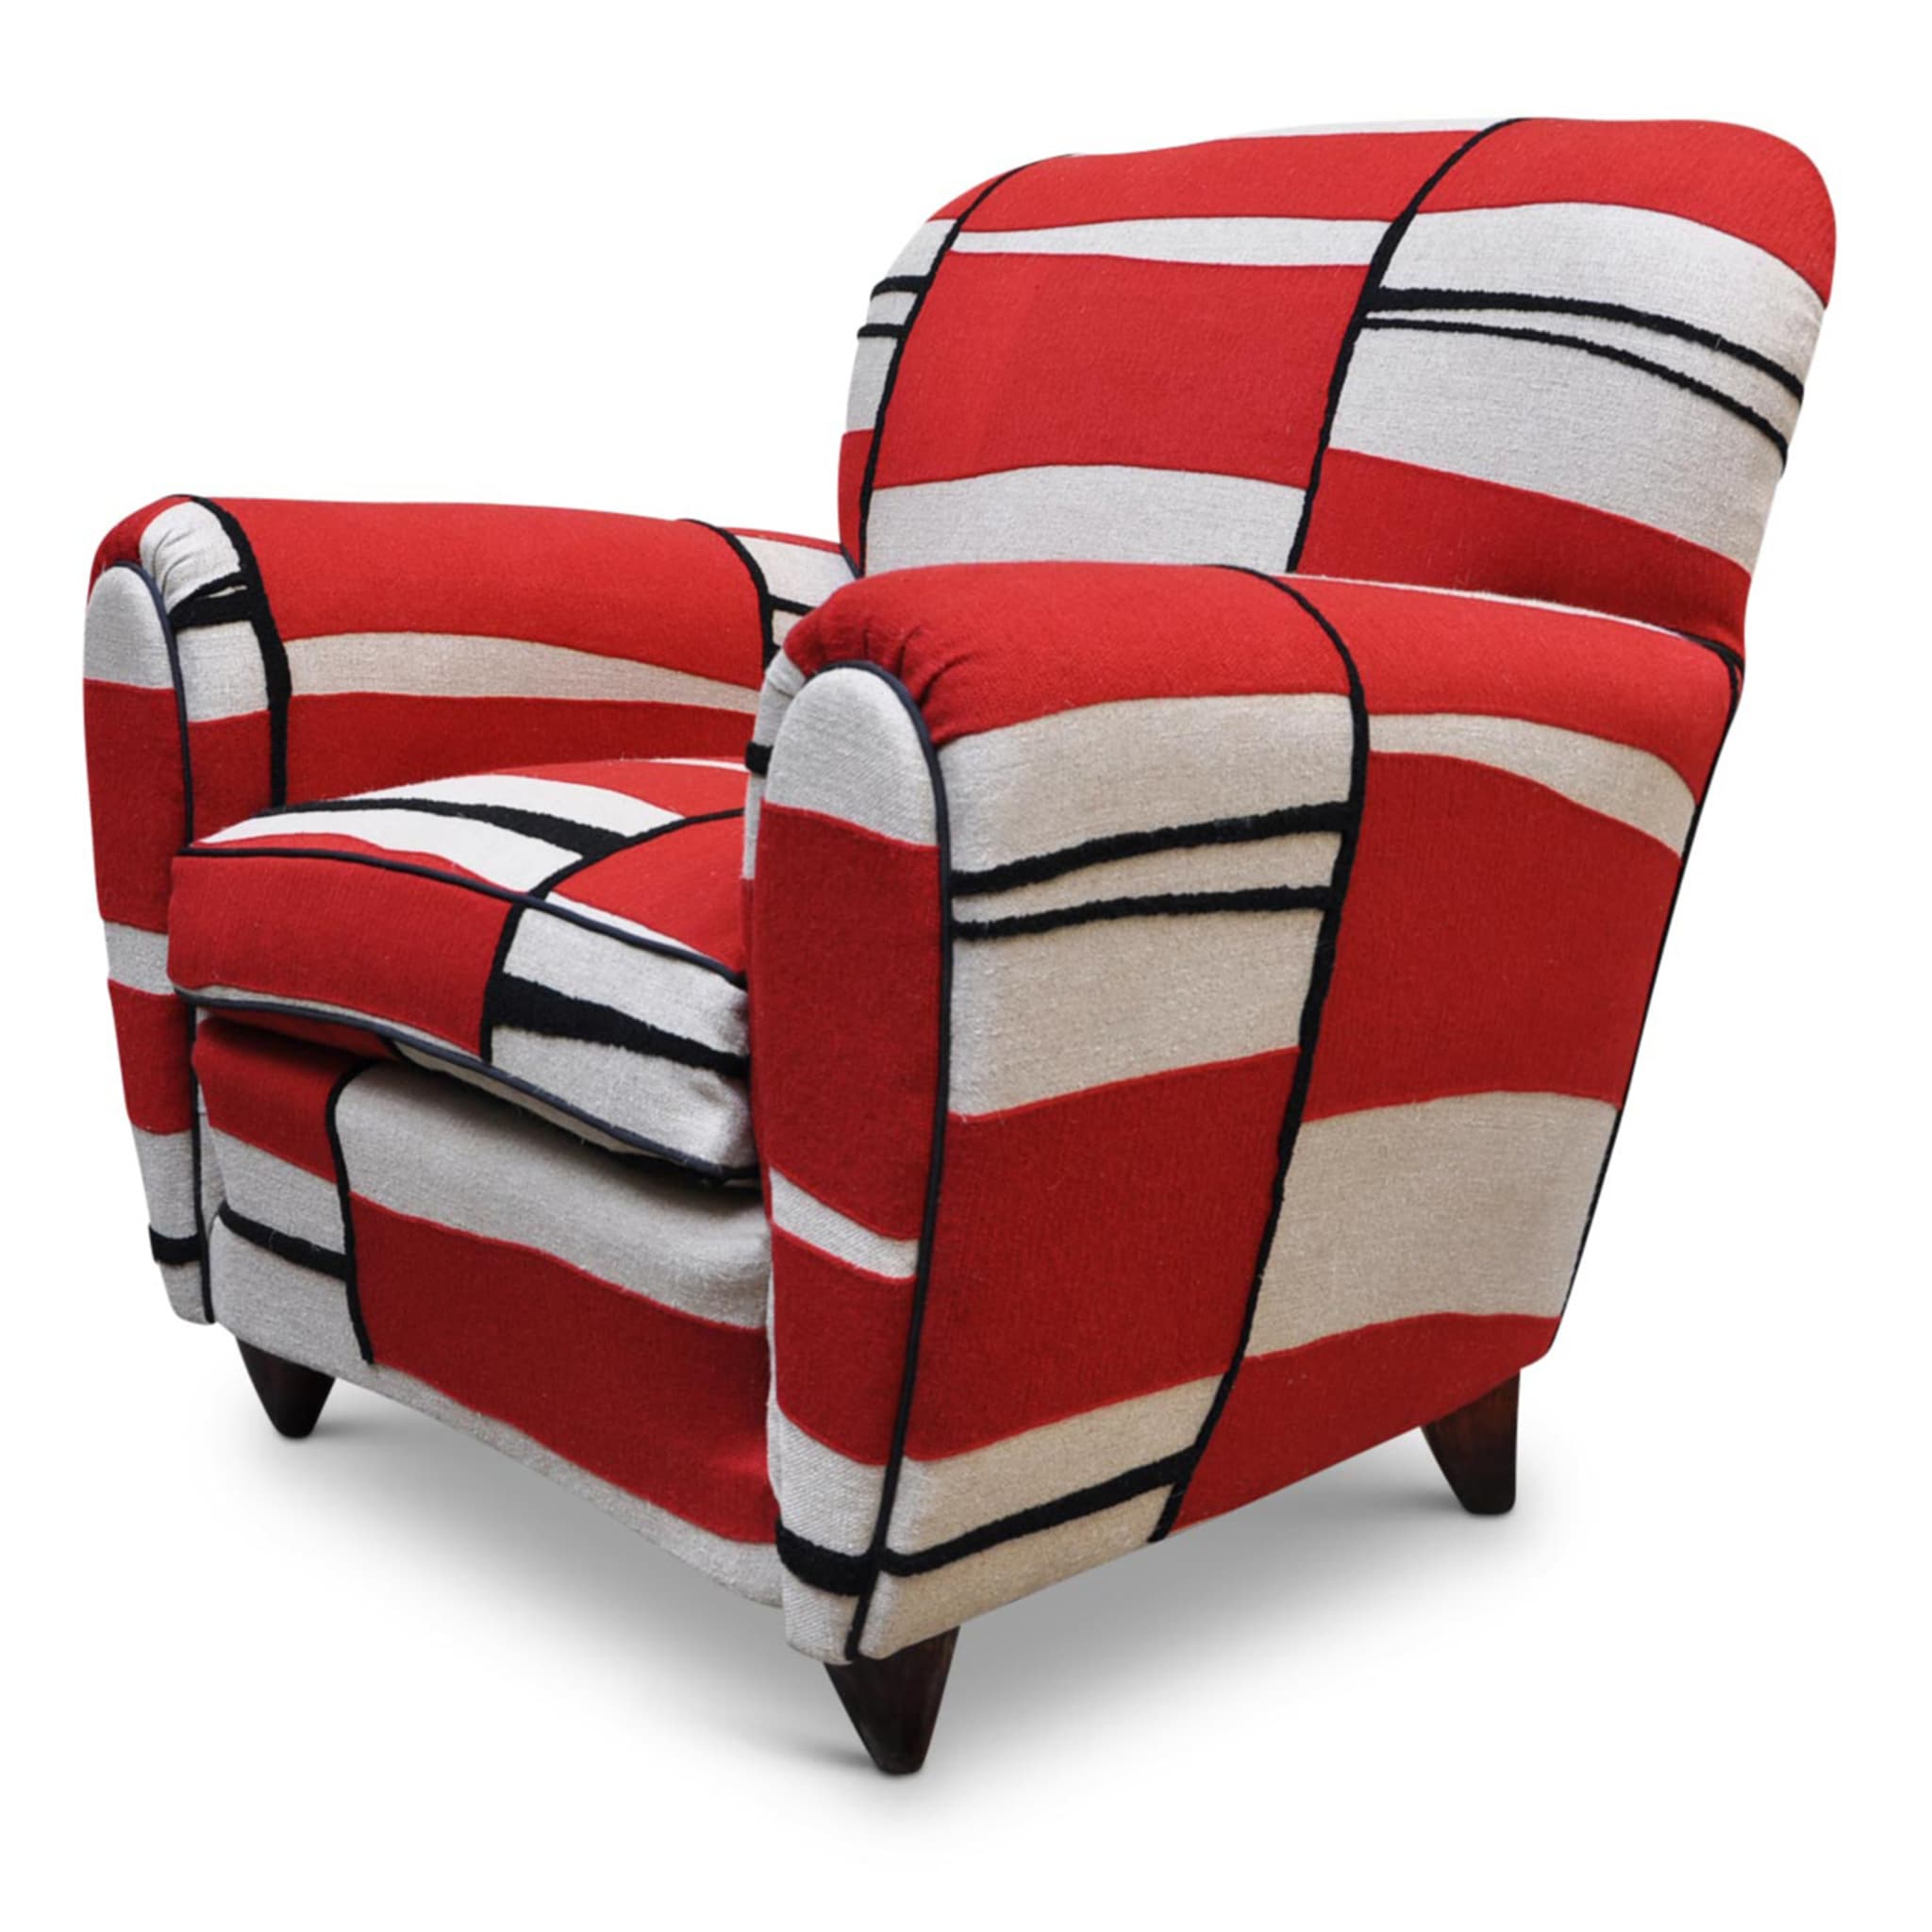 Red & White Passion Armchair - Alternative view 4